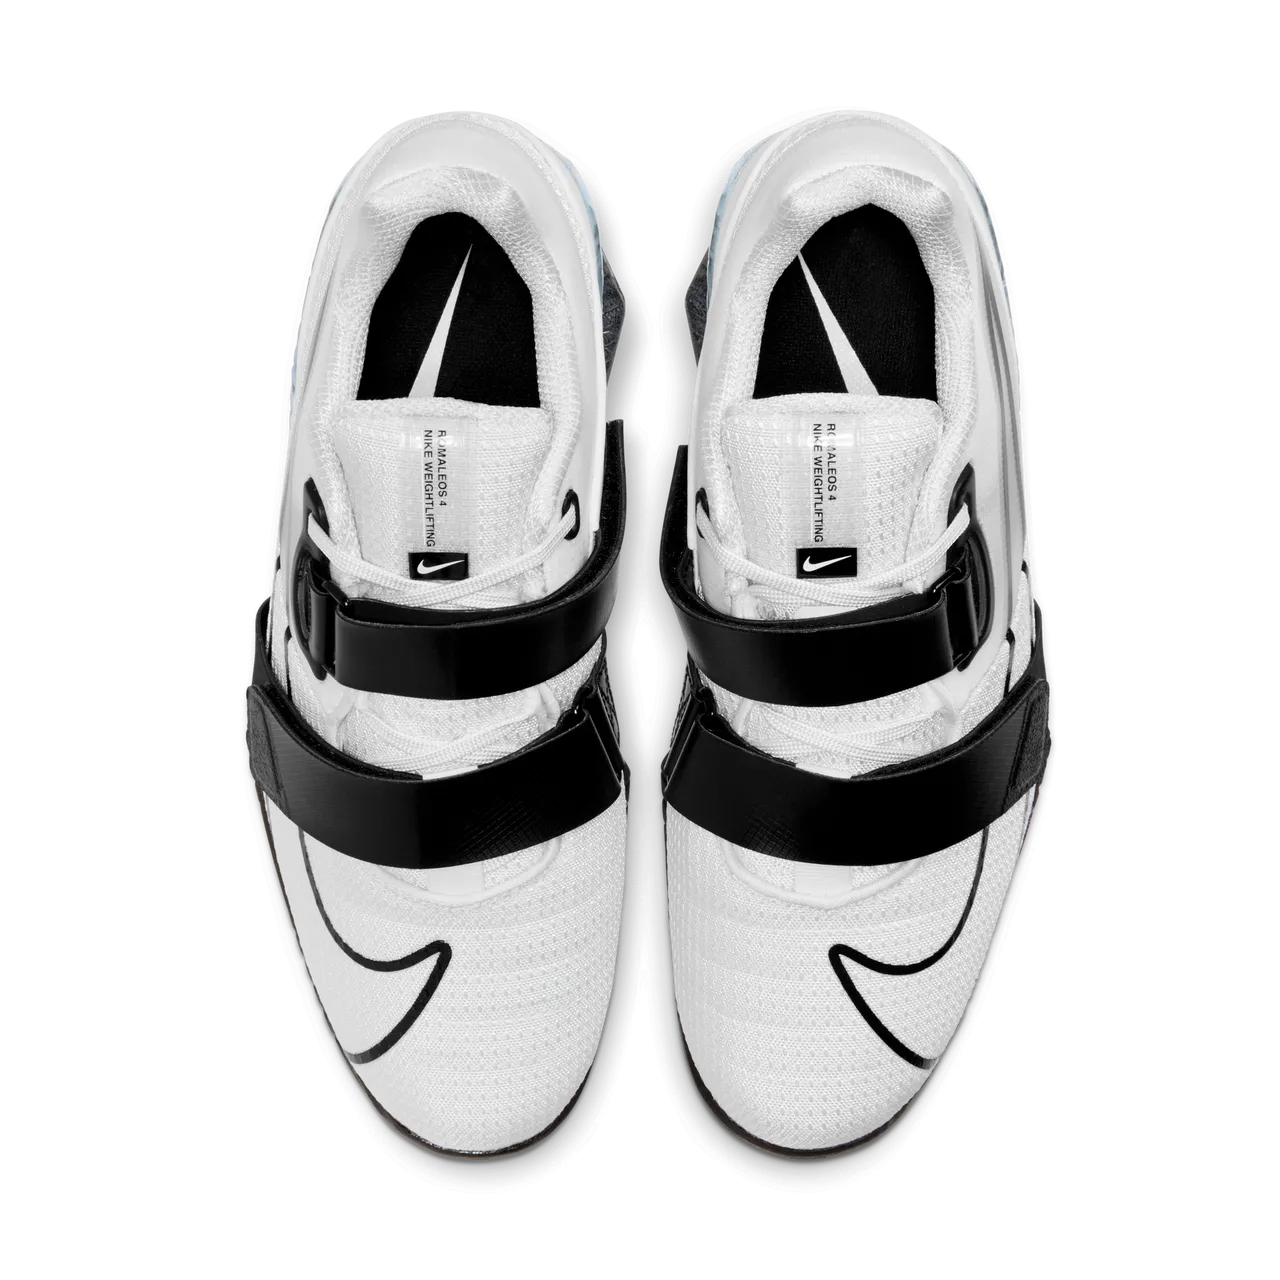 Nike Romaleos 4 Weightlifting Shoes - White